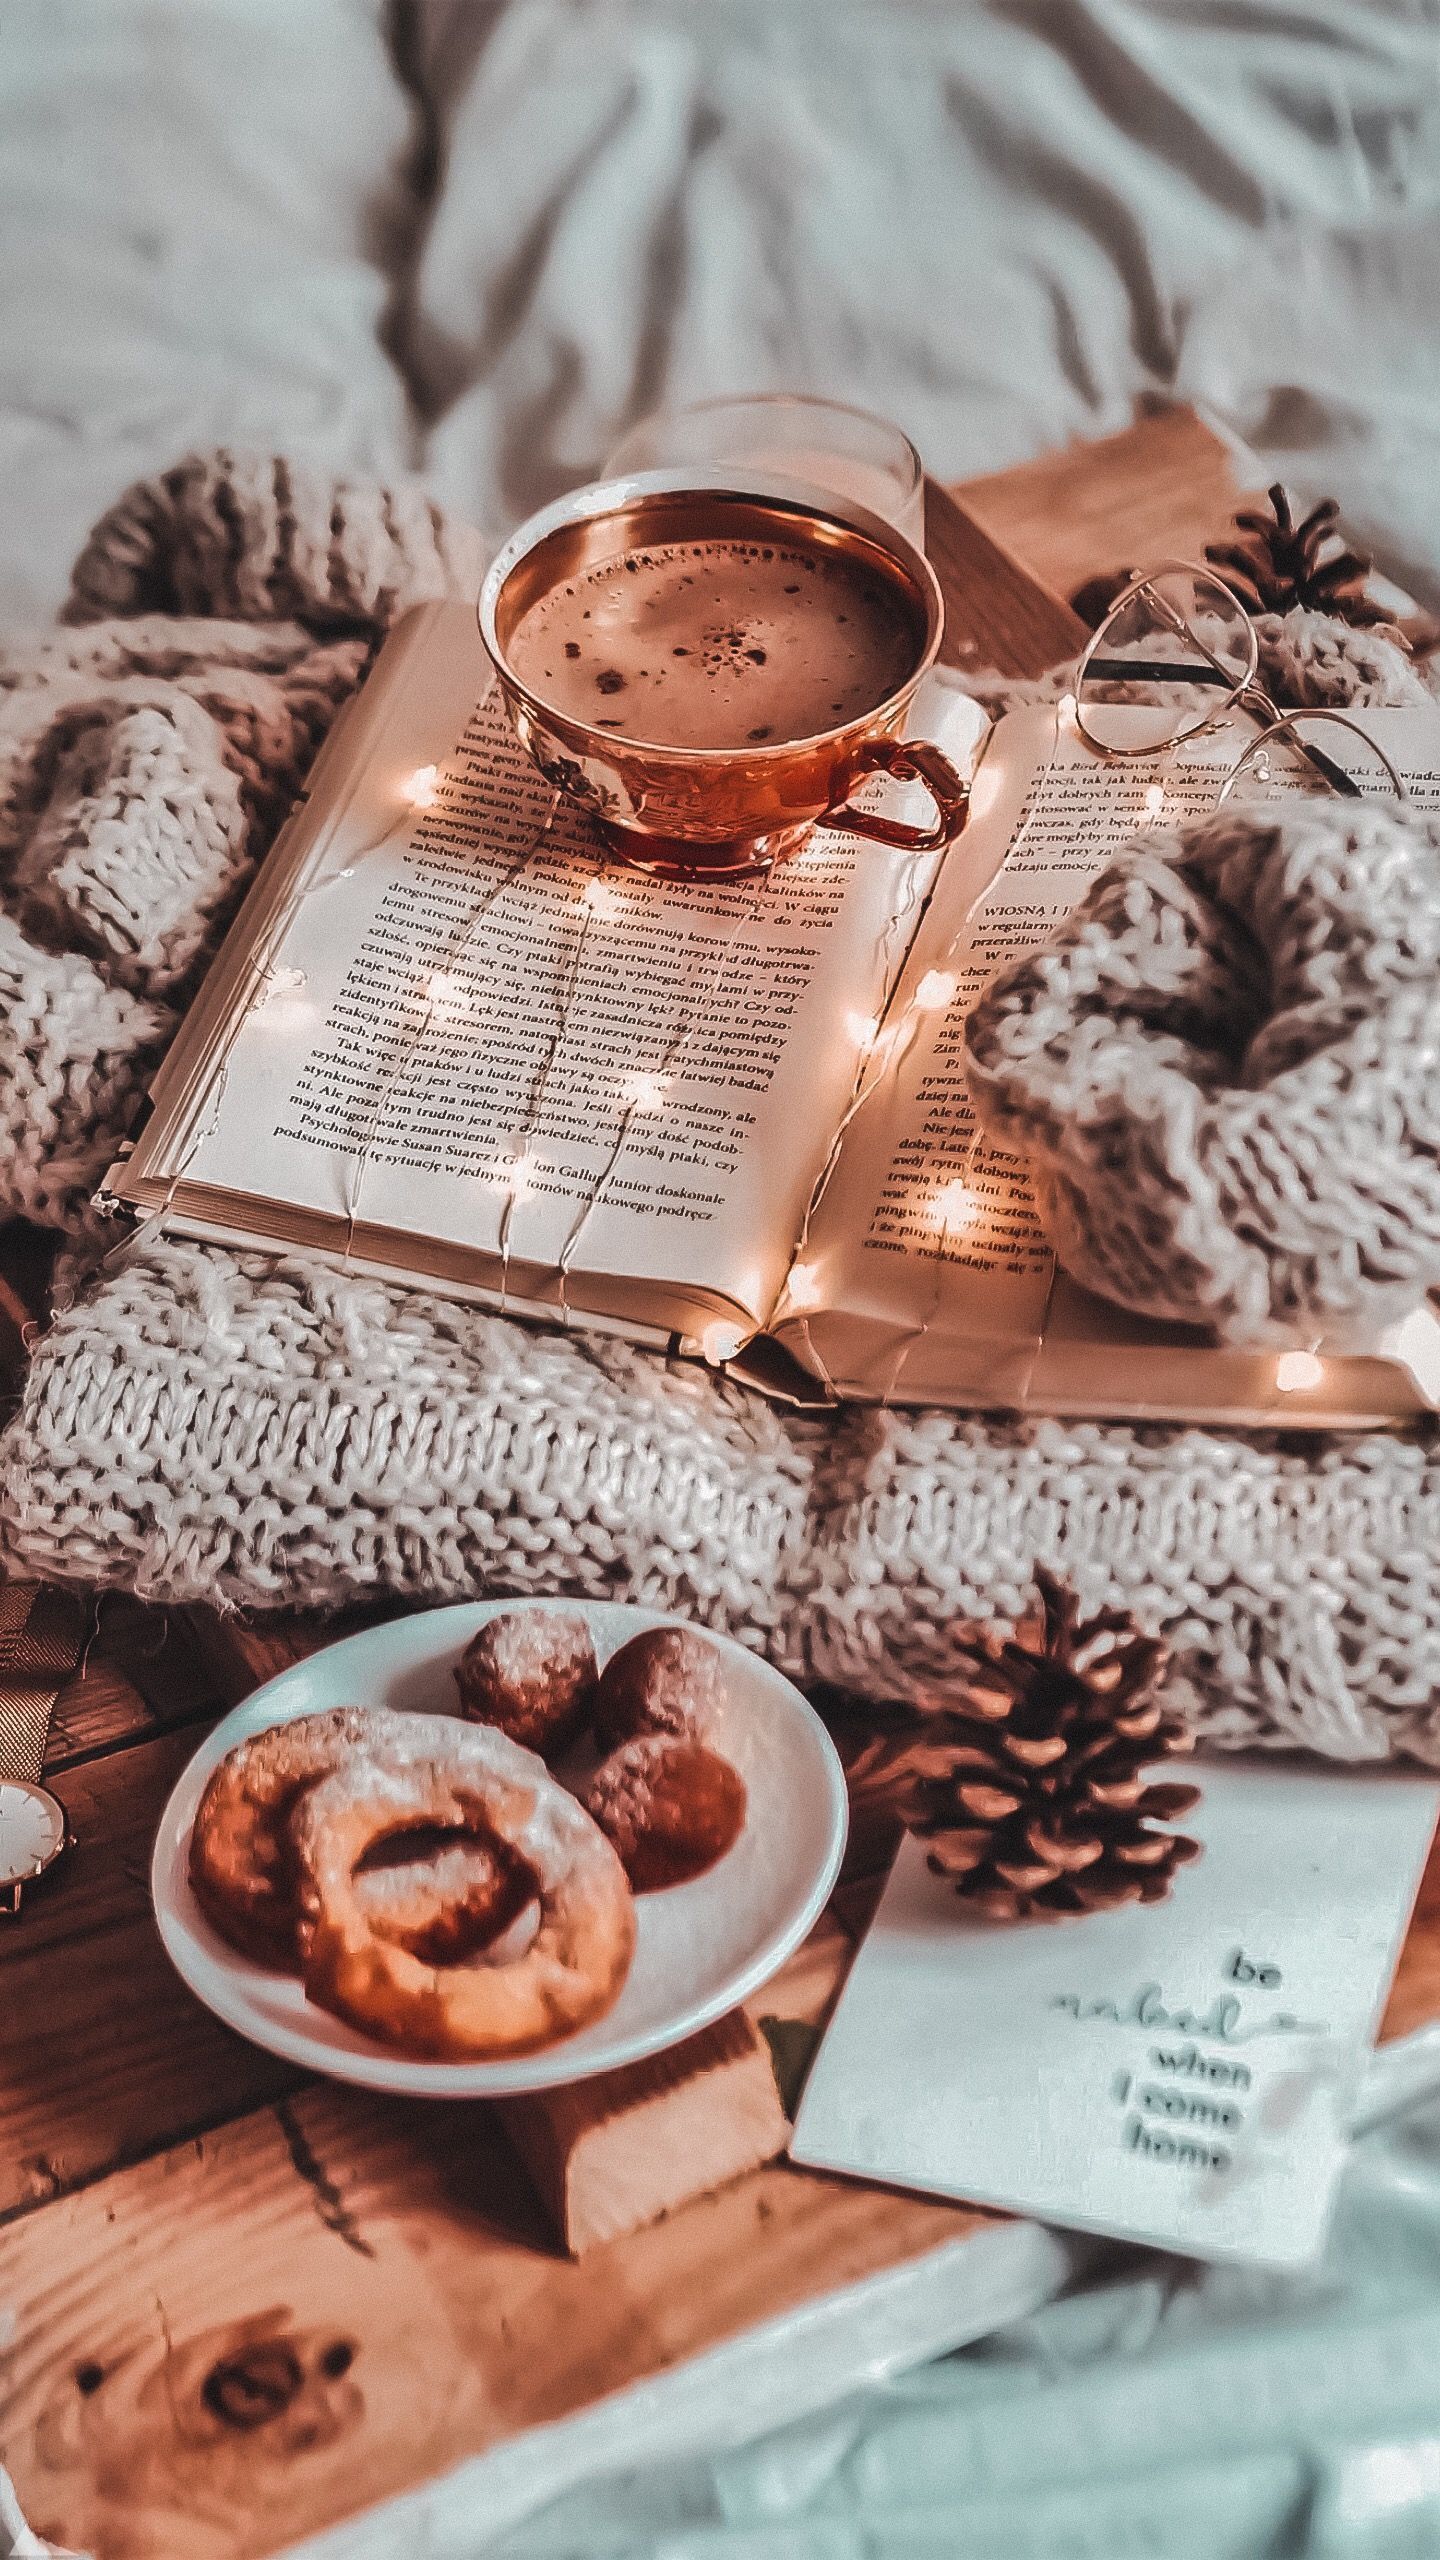 A cup of coffee and some donuts on top - Cozy